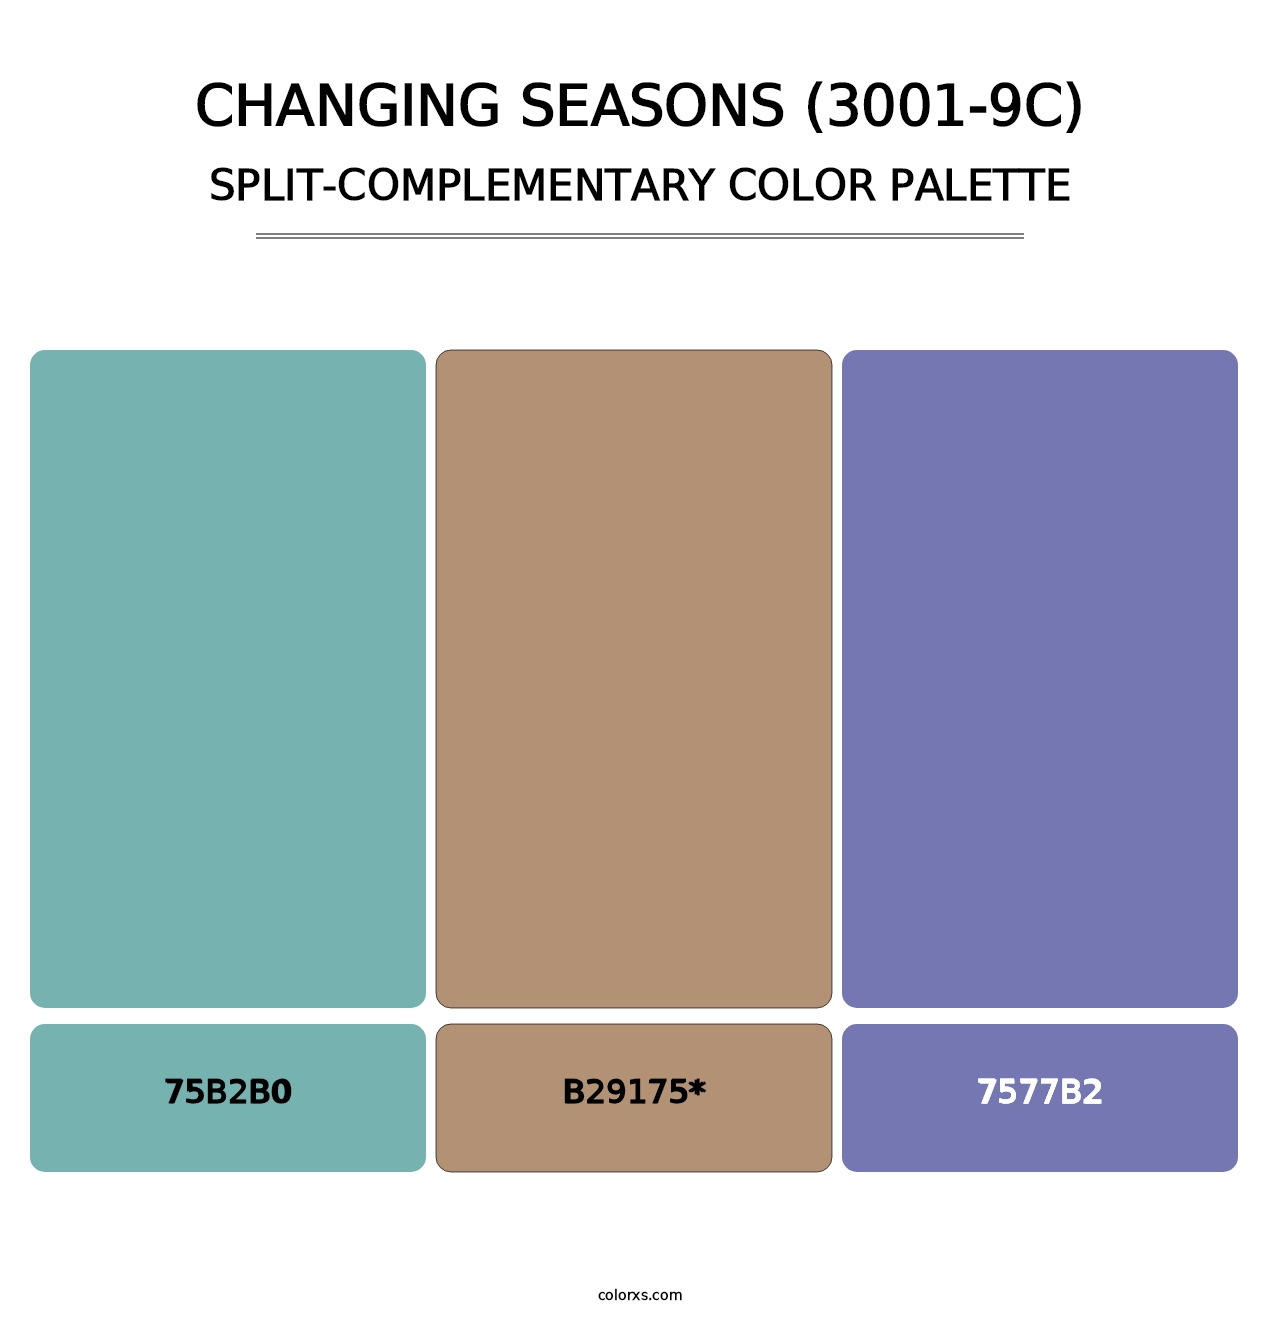 Changing Seasons (3001-9C) - Split-Complementary Color Palette